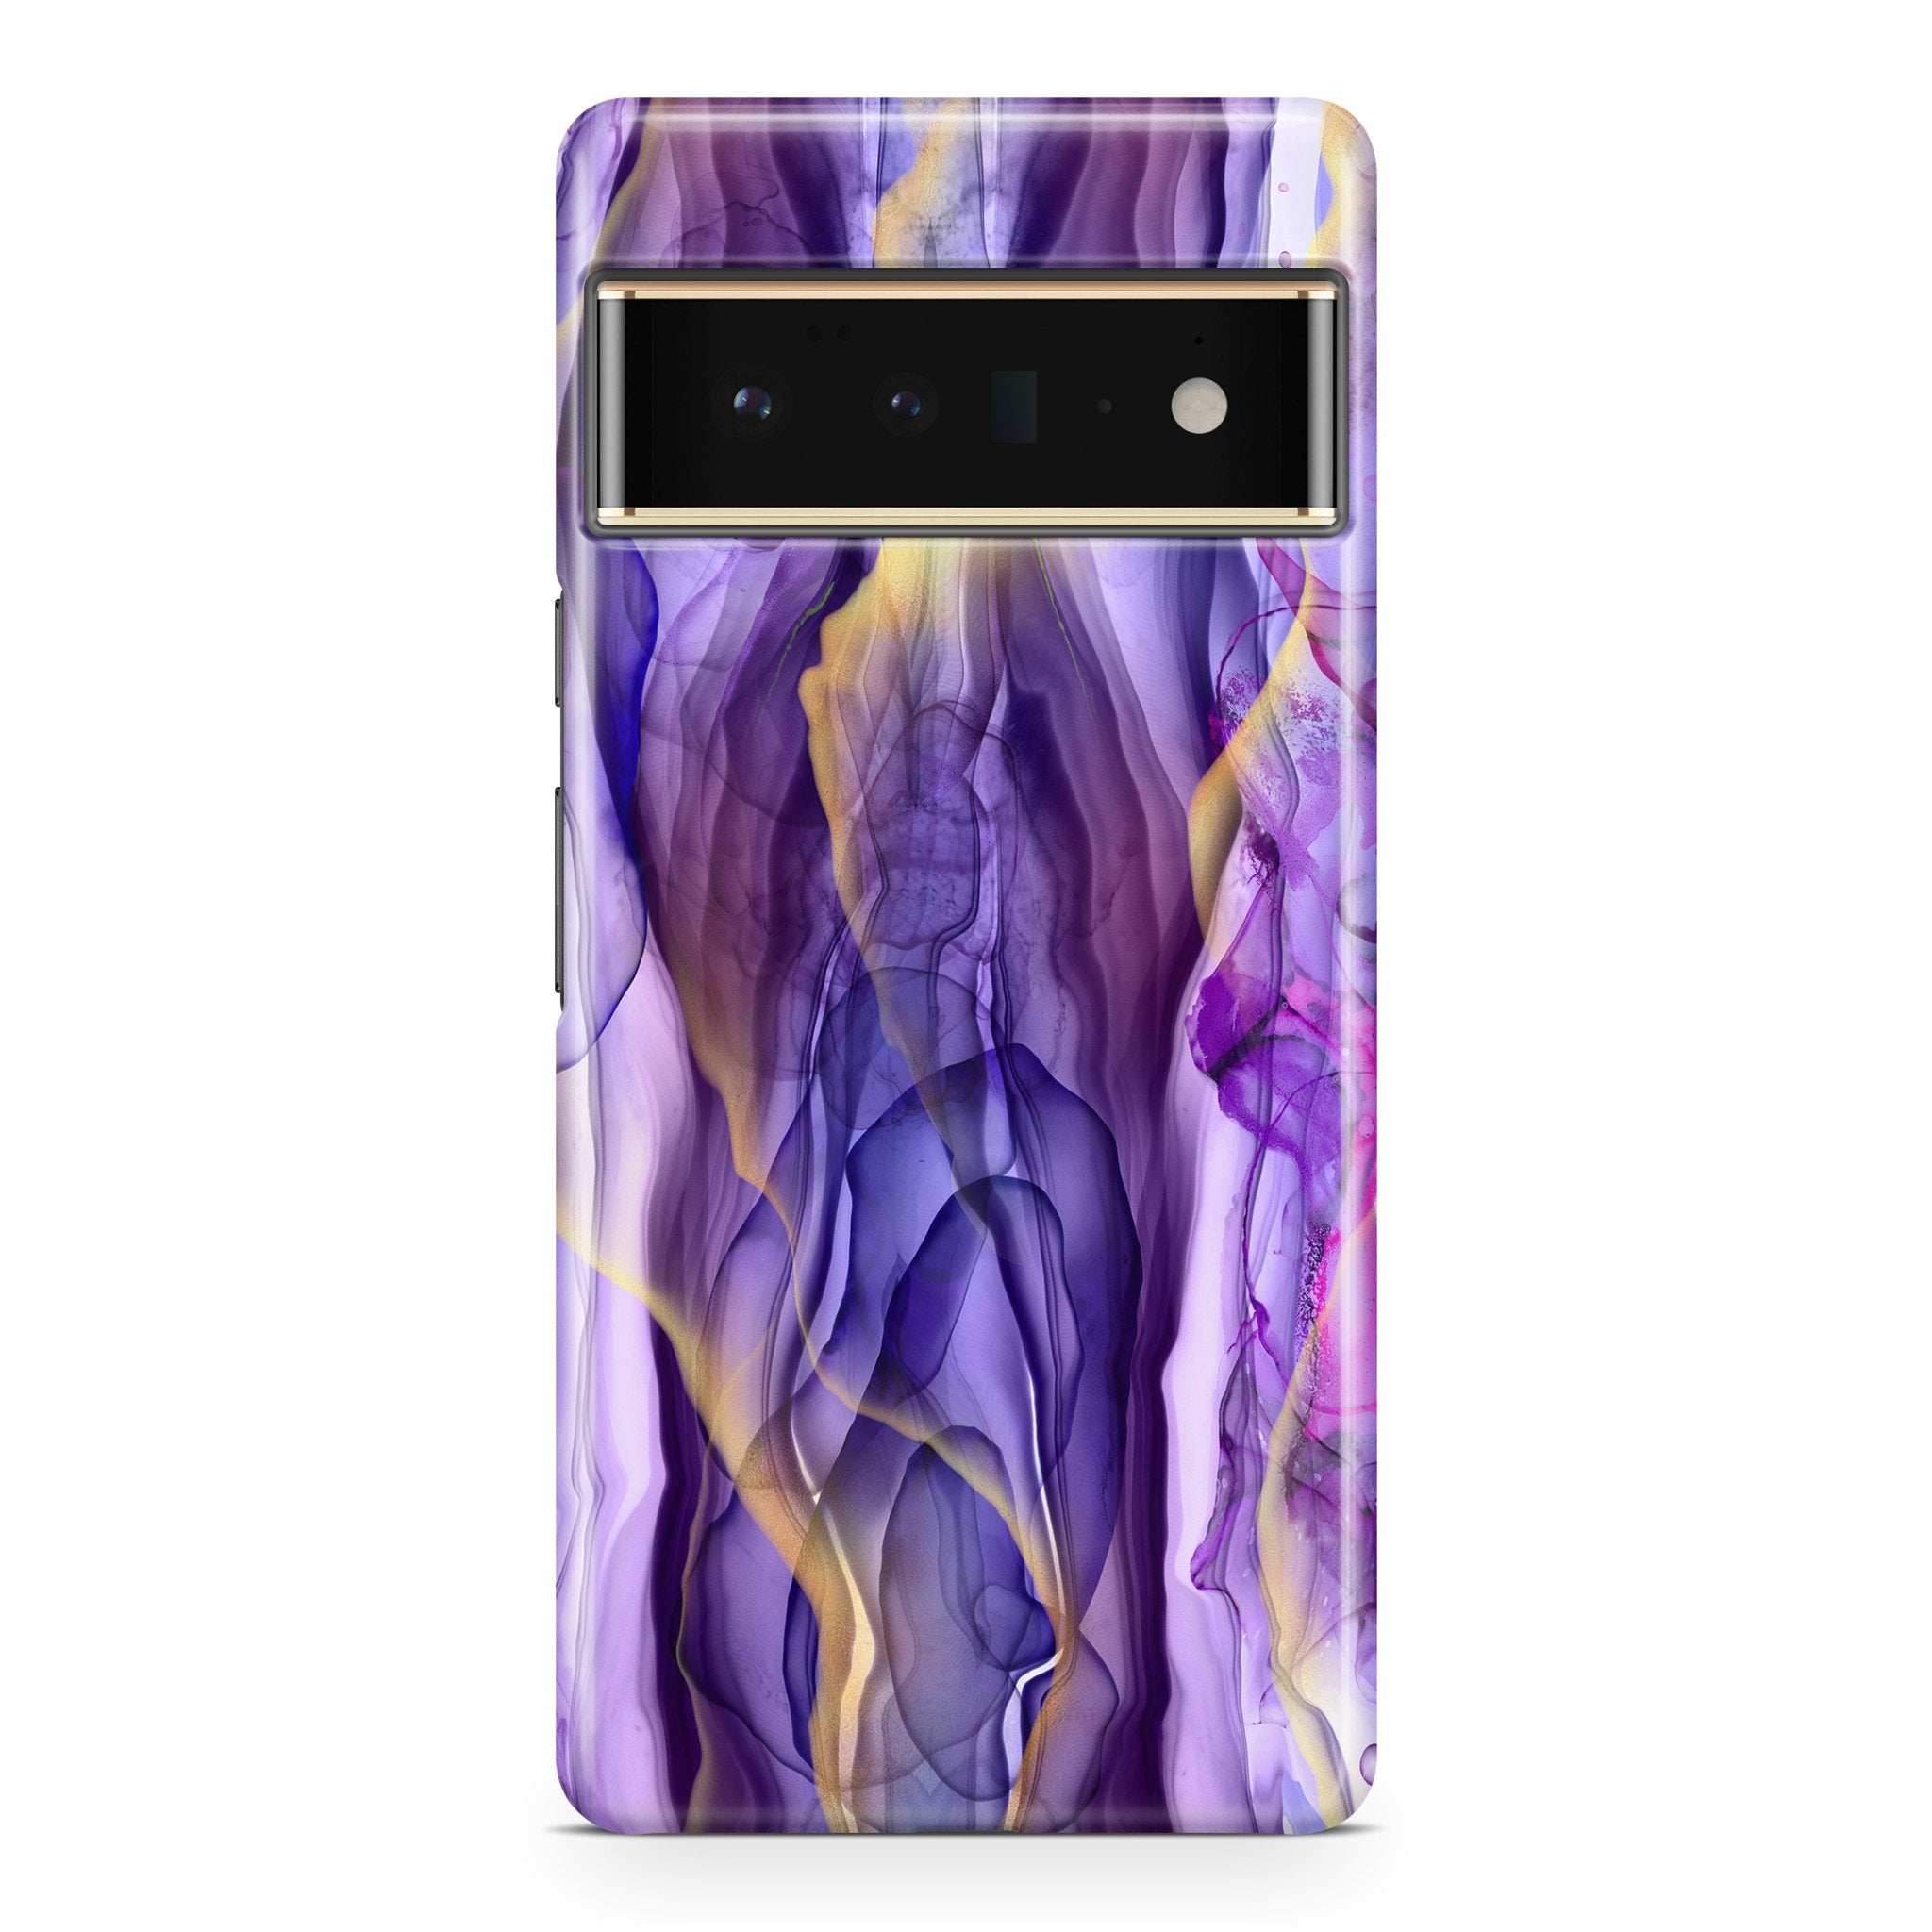 Violet Wisps - Google phone case designs by CaseSwagger